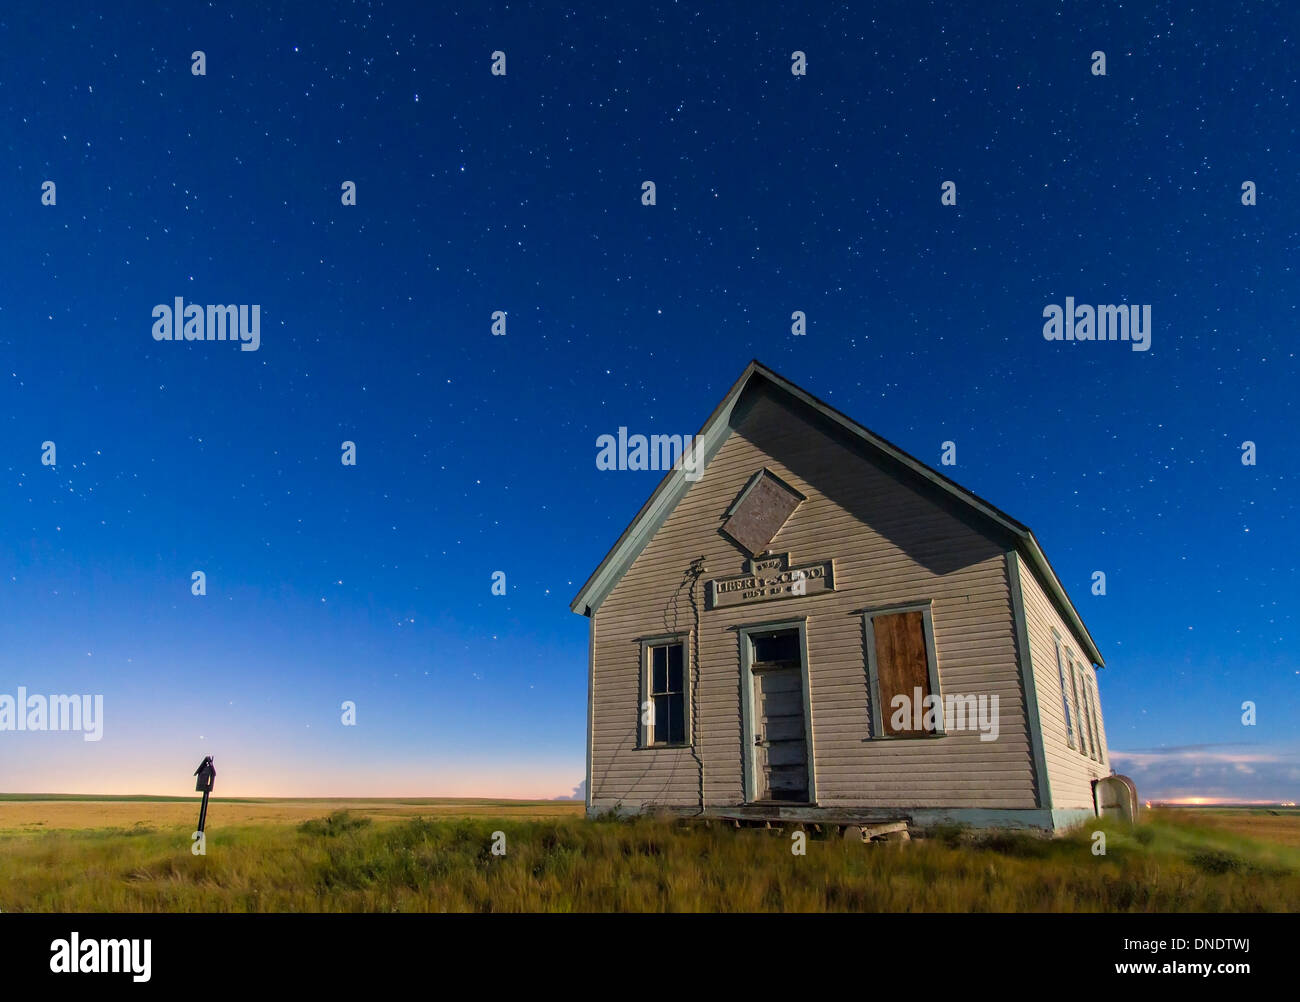 The 1909 Liberty School on the Canadian Prarie in moonlight with Big Dipper. Stock Photo